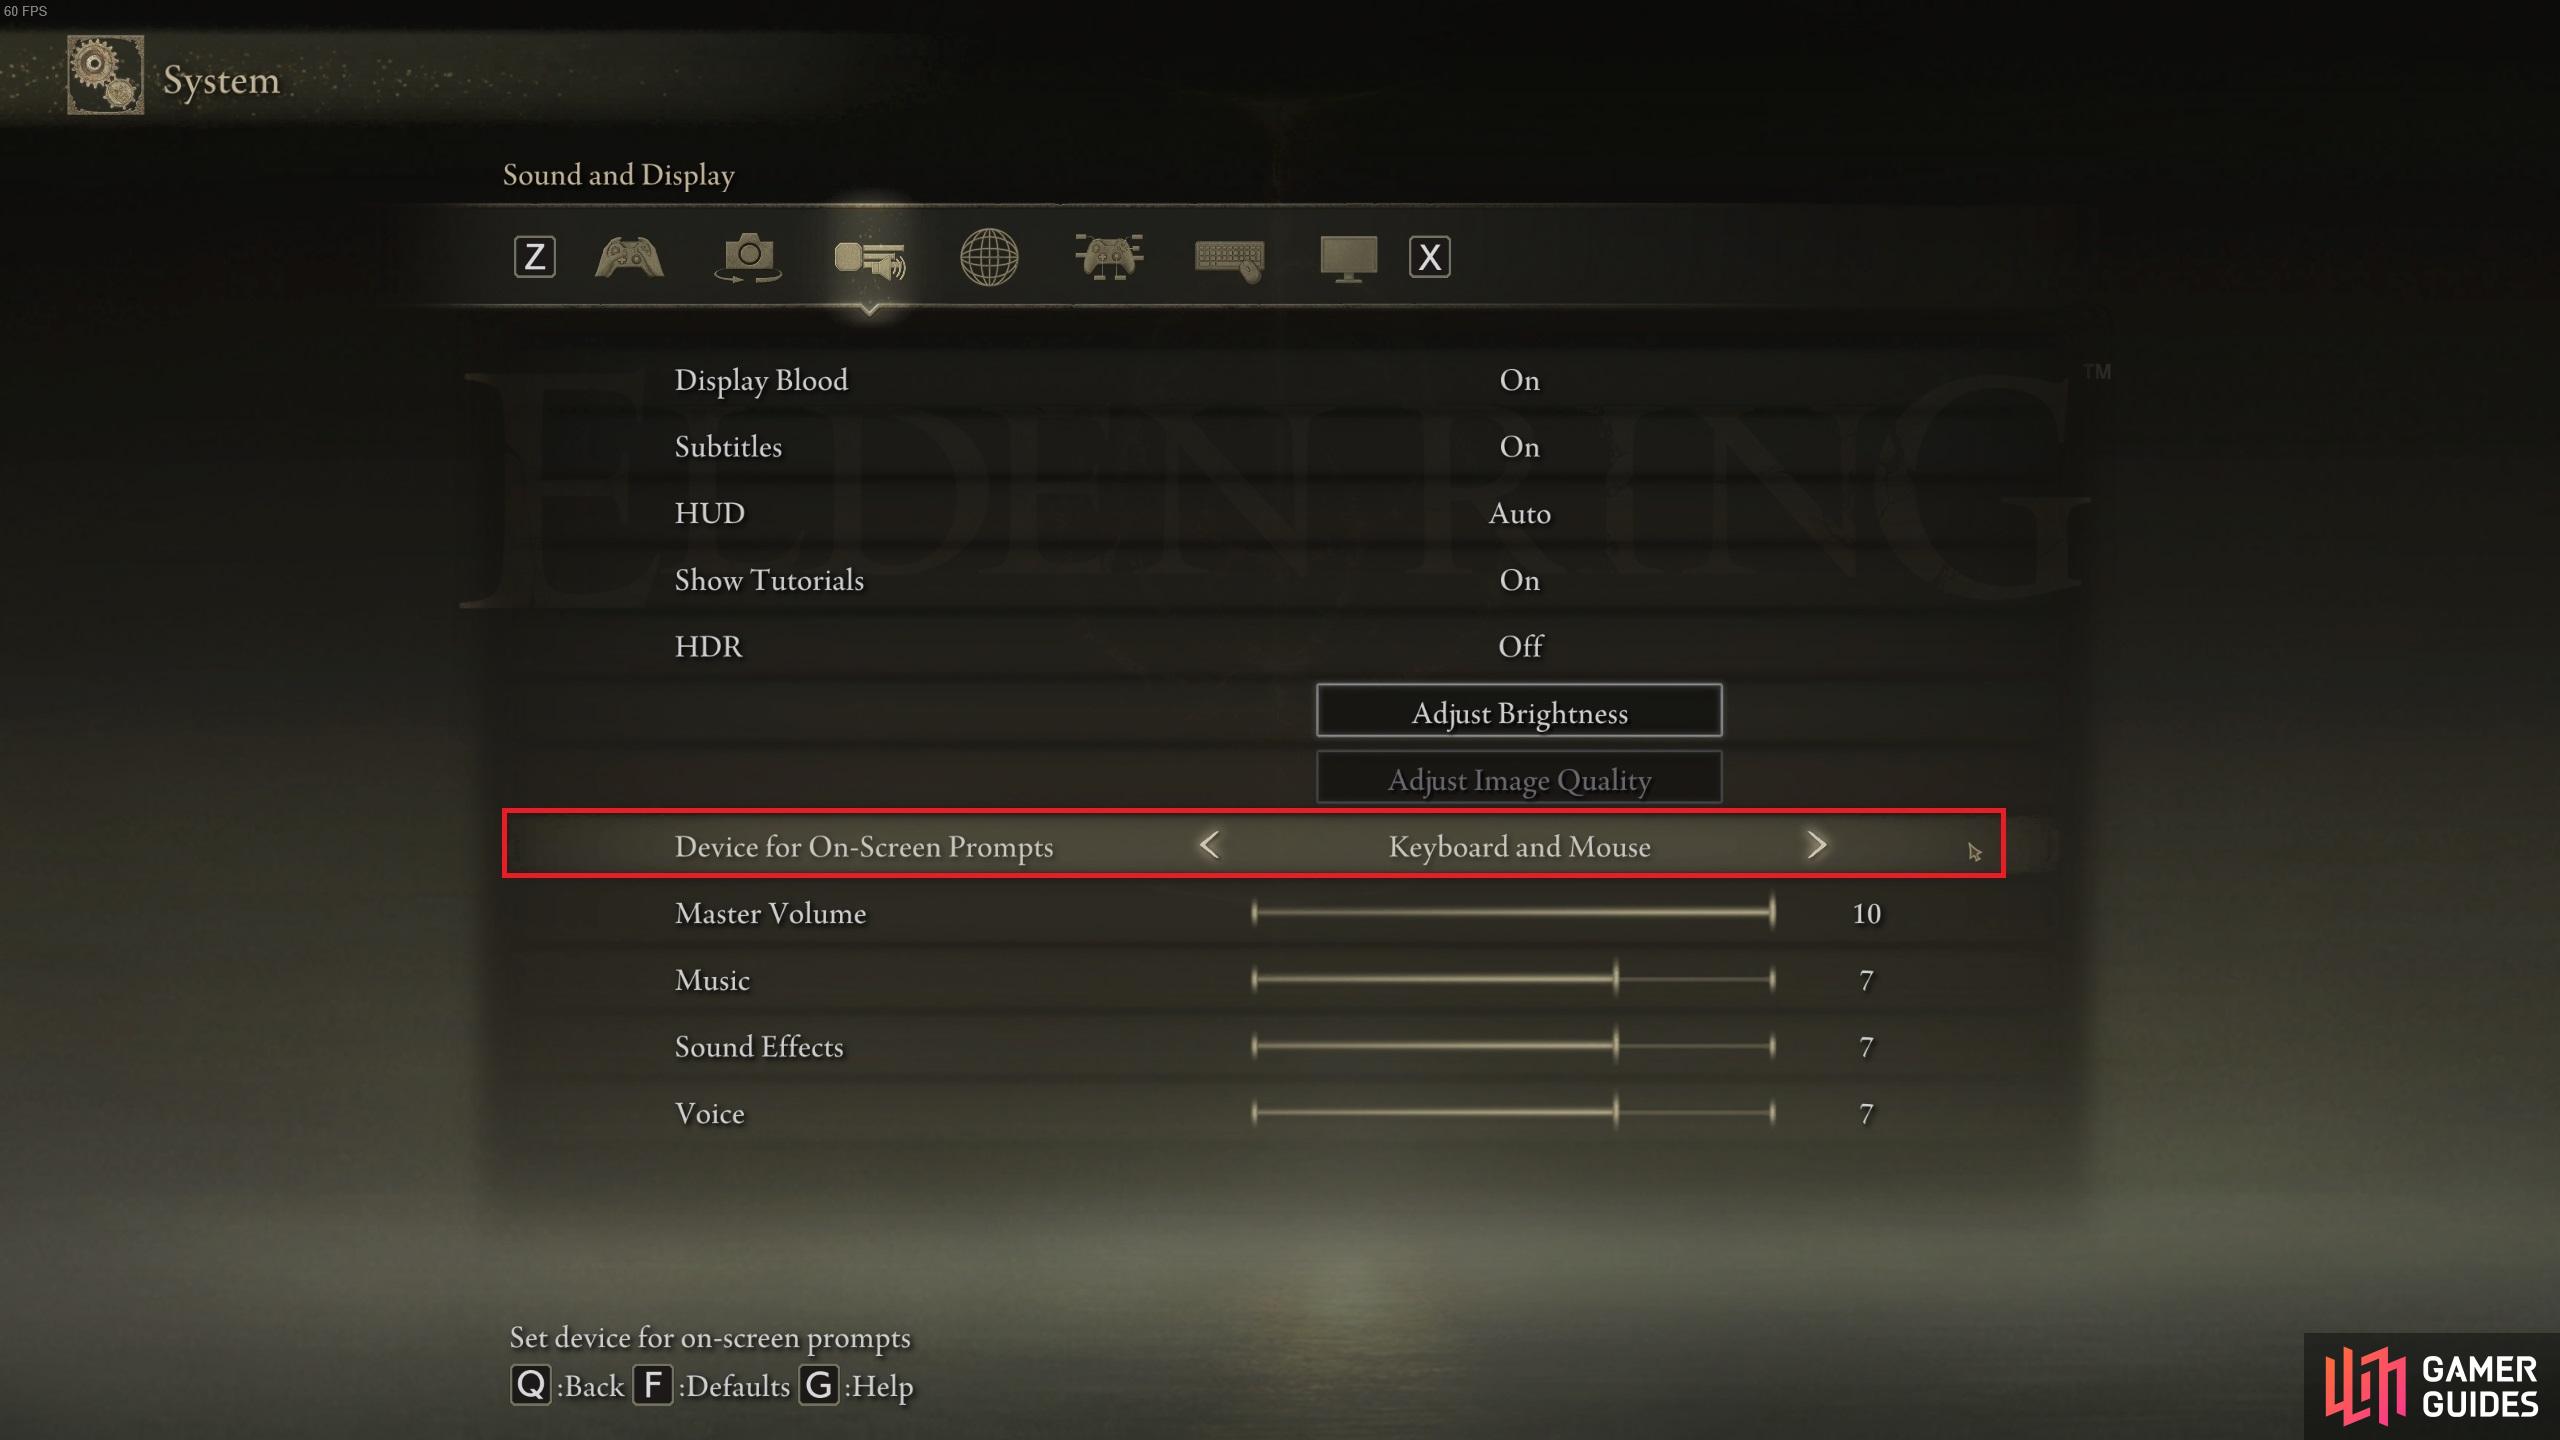 You'll find the option to change the default controls in the Sound and Display tab of the System options menu.